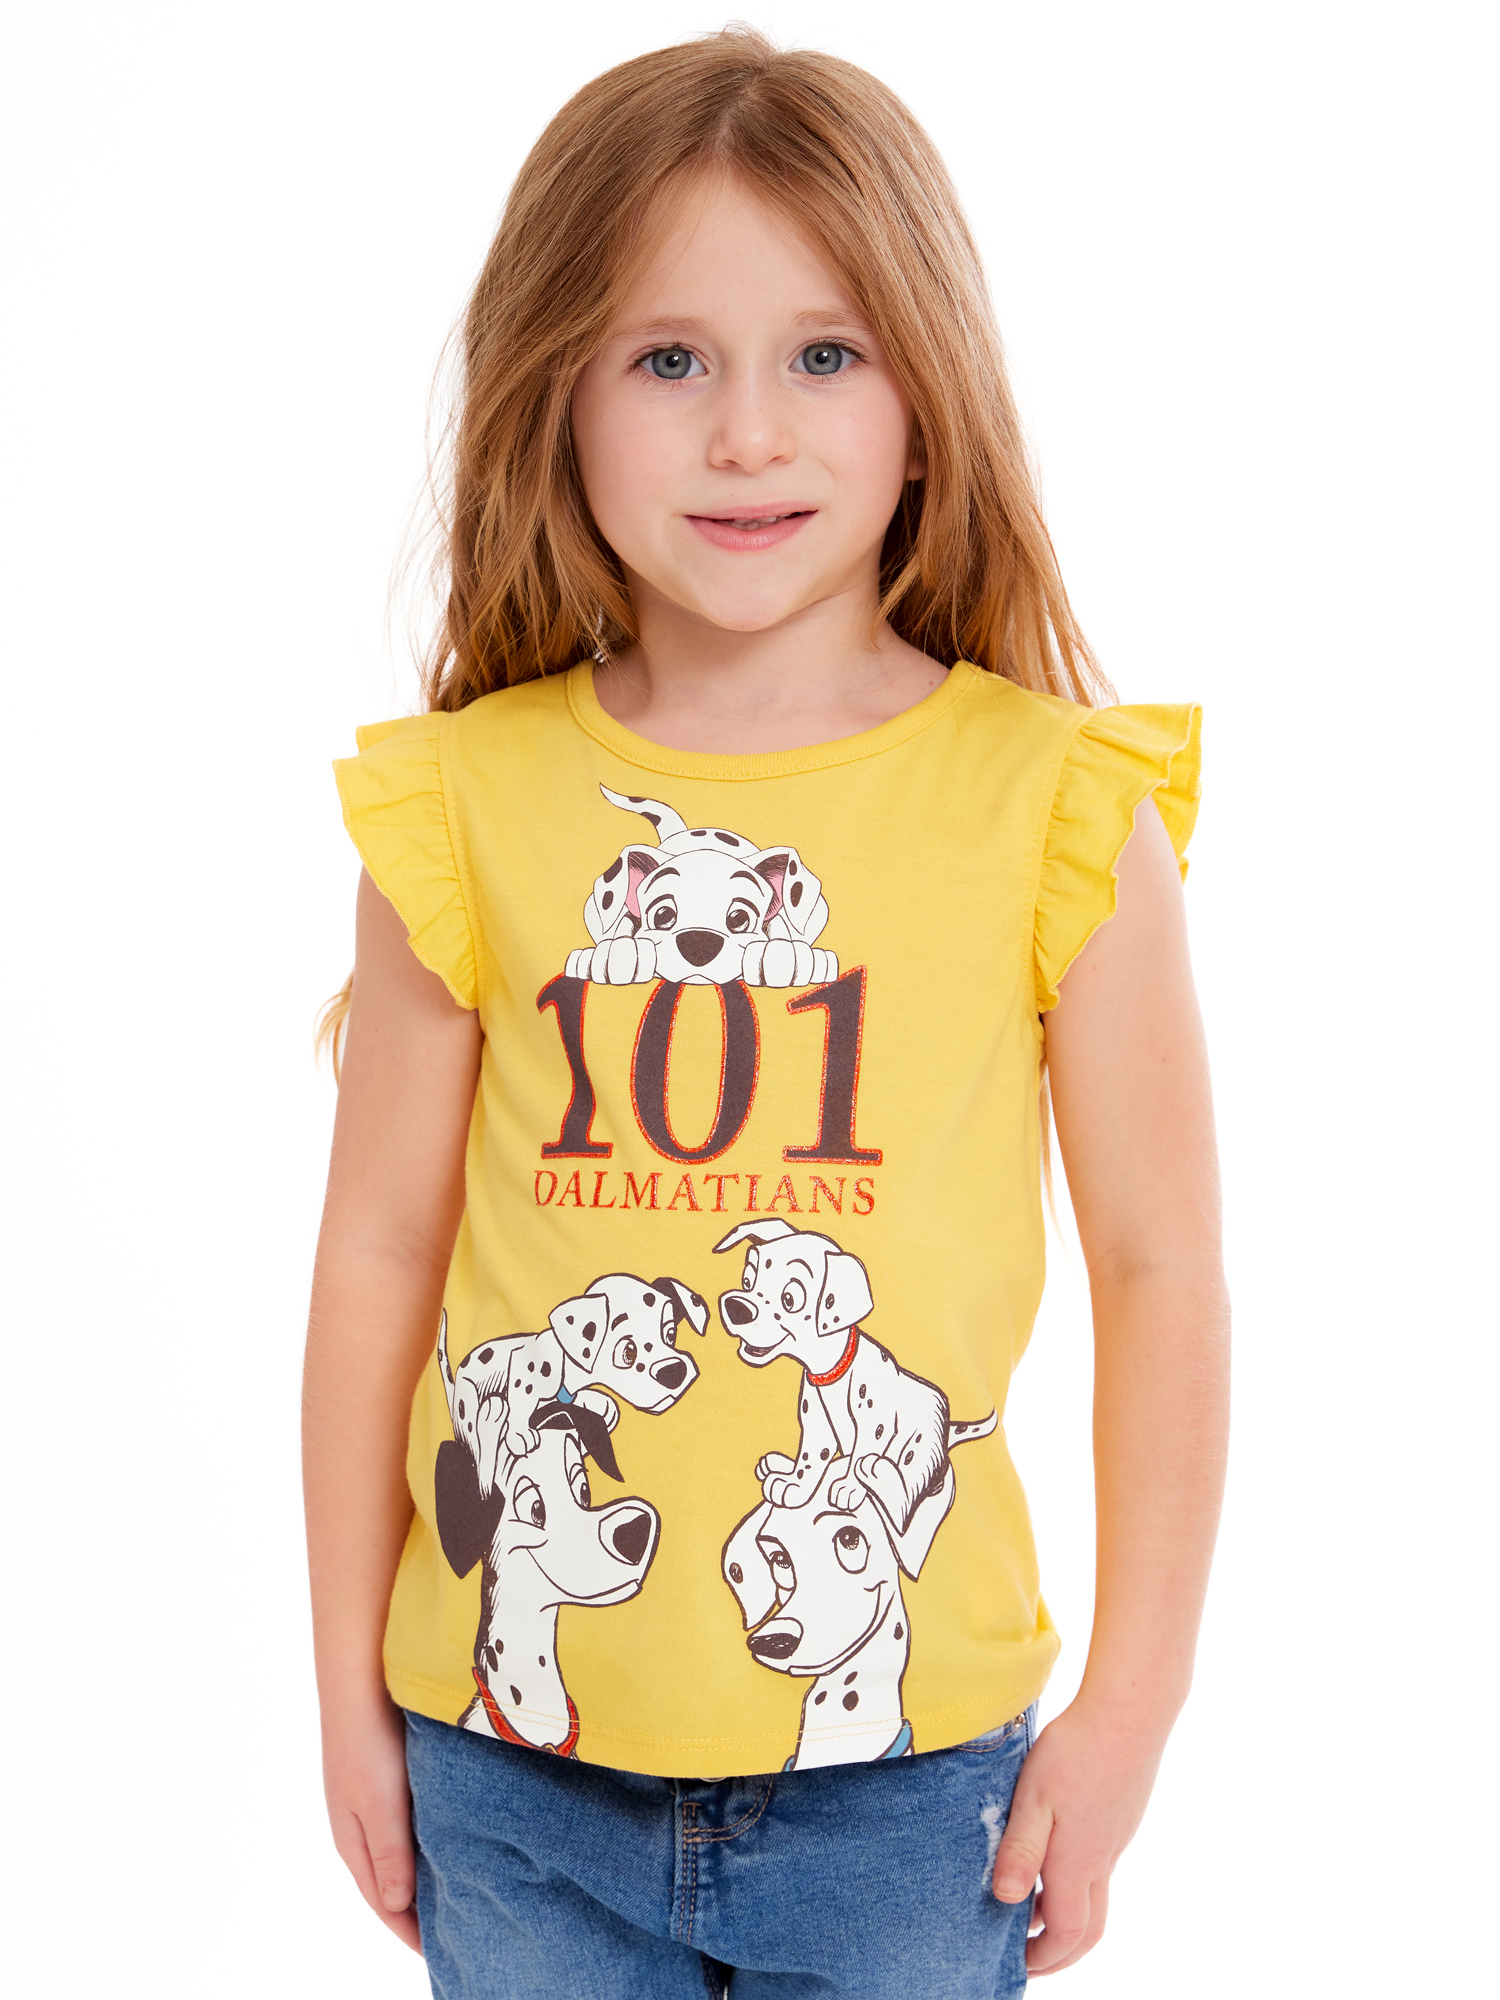 Disney Classics Toddler Girl Graphic Print Fashion T-Shirts, 4-Pack, Sizes 2T-5T - image 4 of 13